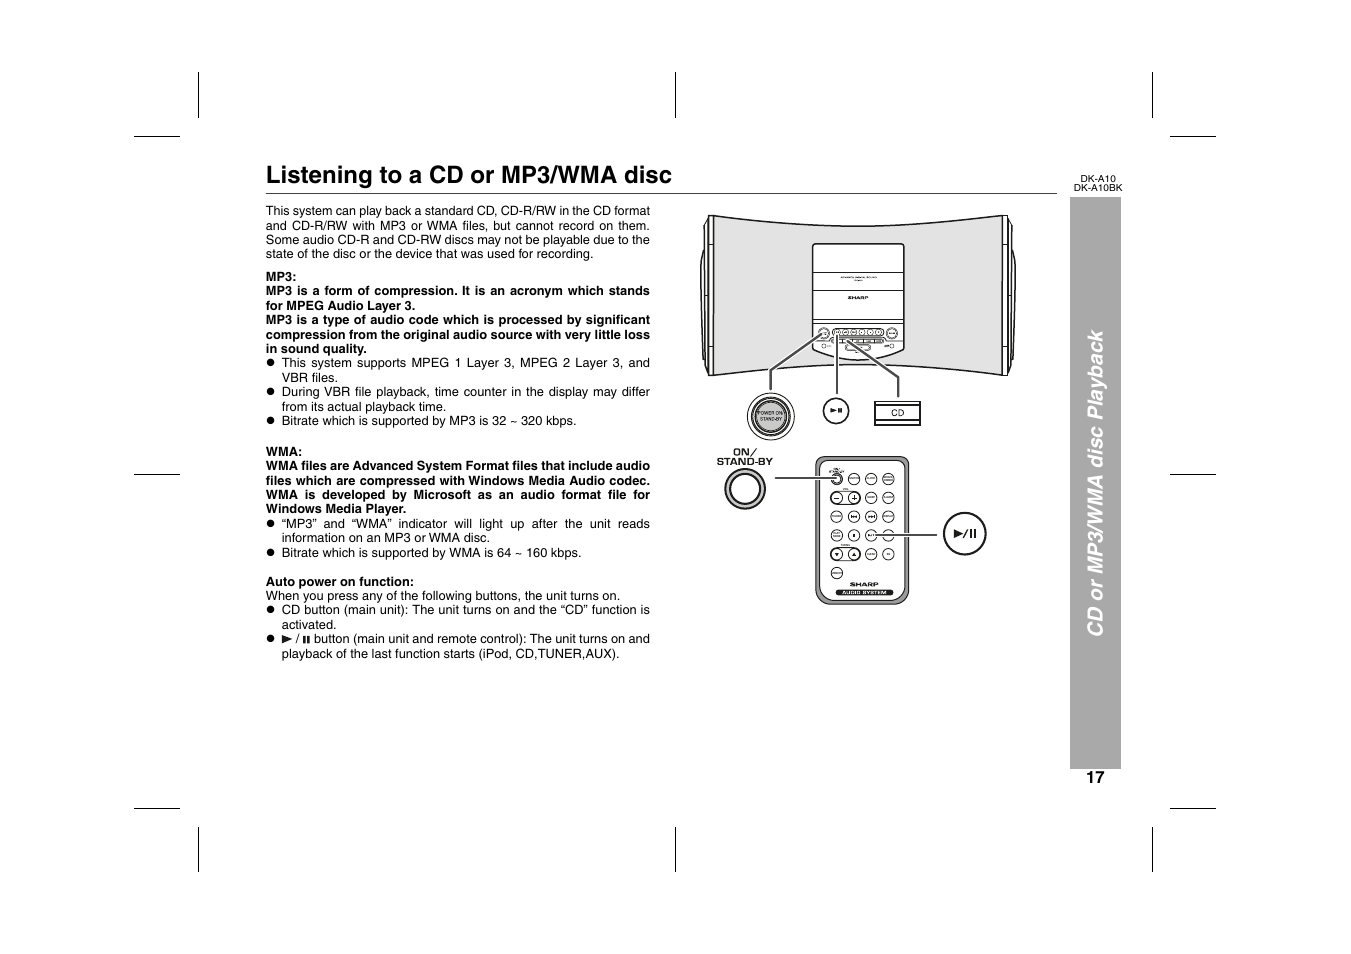 Cd or mp3/wma disc playback, Listening to a cd or mp3/wma disc, Graphic | Sharp DK-A10 User Manual | Page 17 / 30